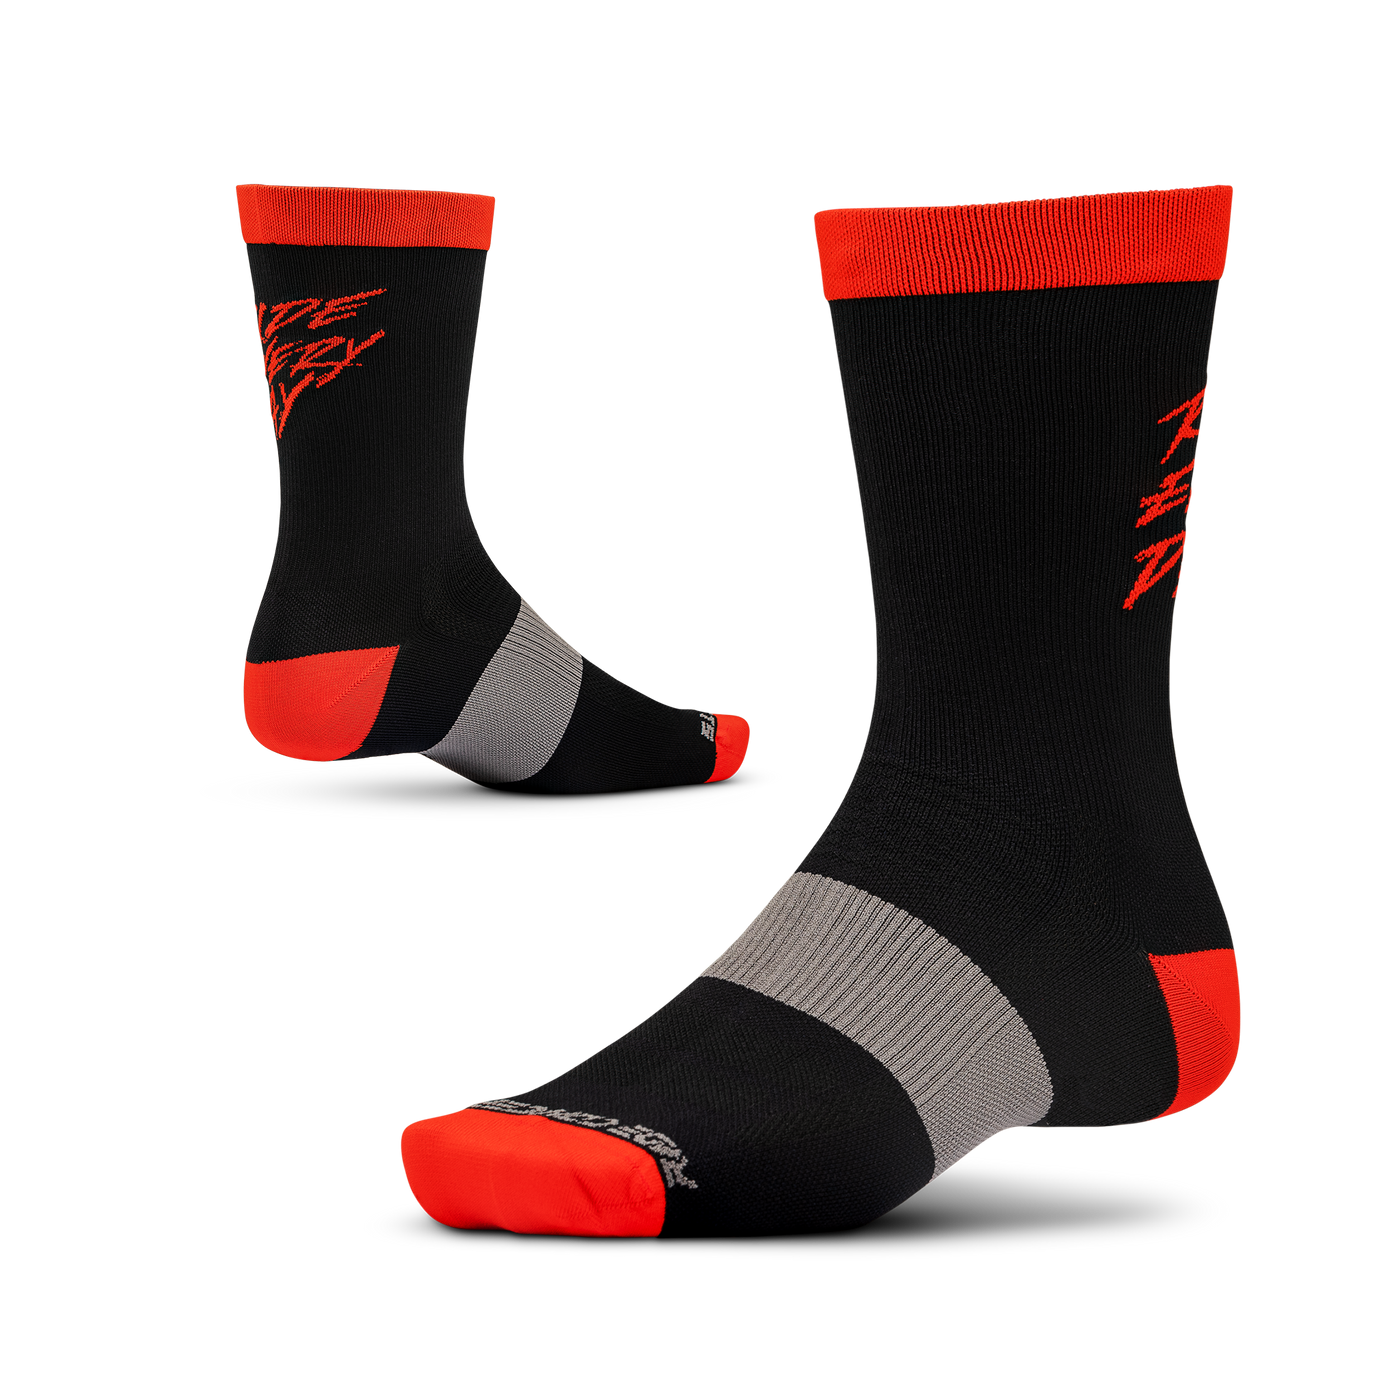 Ride Concepts Ride Every Day Youth MTB Sock - Synthetic 8" - Black and Red